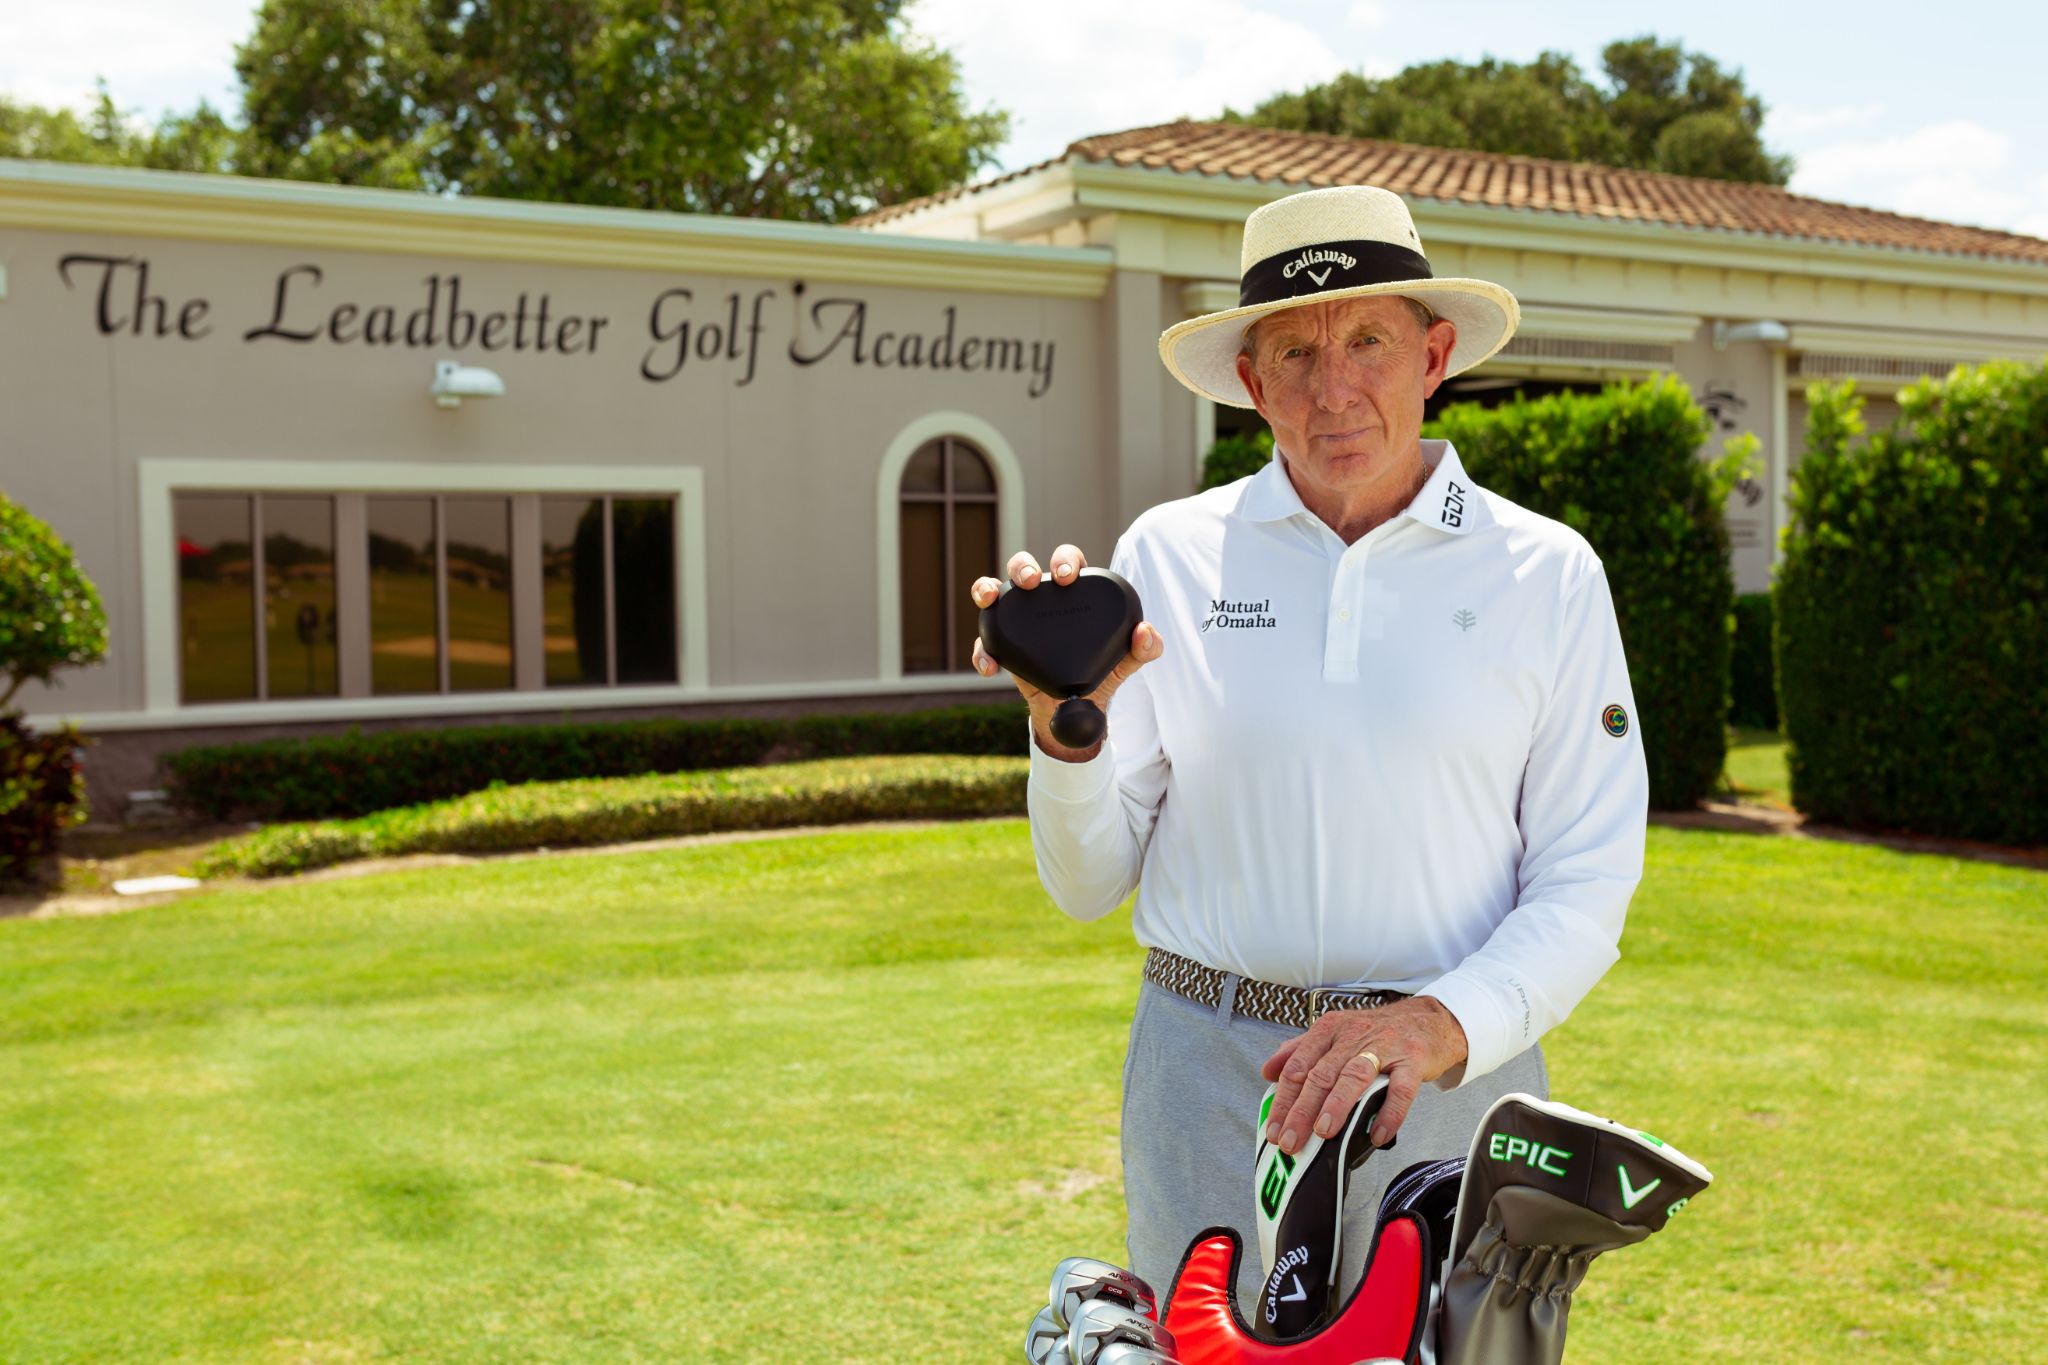 Therabody At Leadbetter Golf Academy Two Stories Media